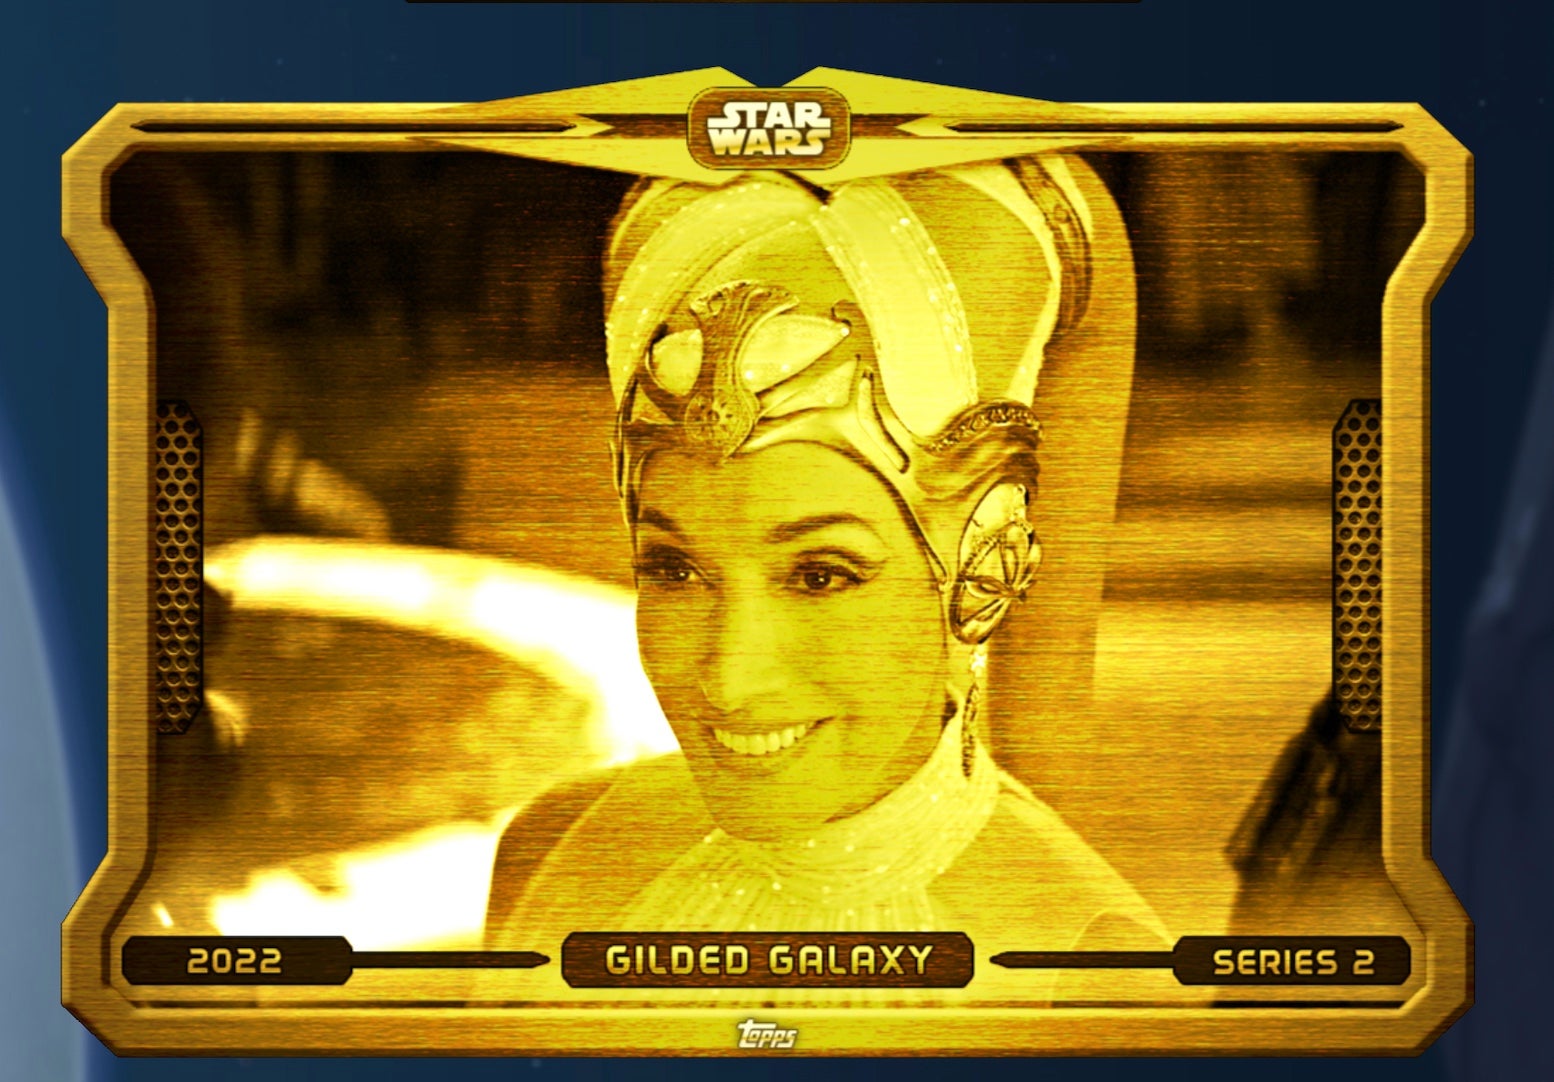 Gilded Galaxy cards are the reward for collecting weekly marathon releases.  (Image: Topps)